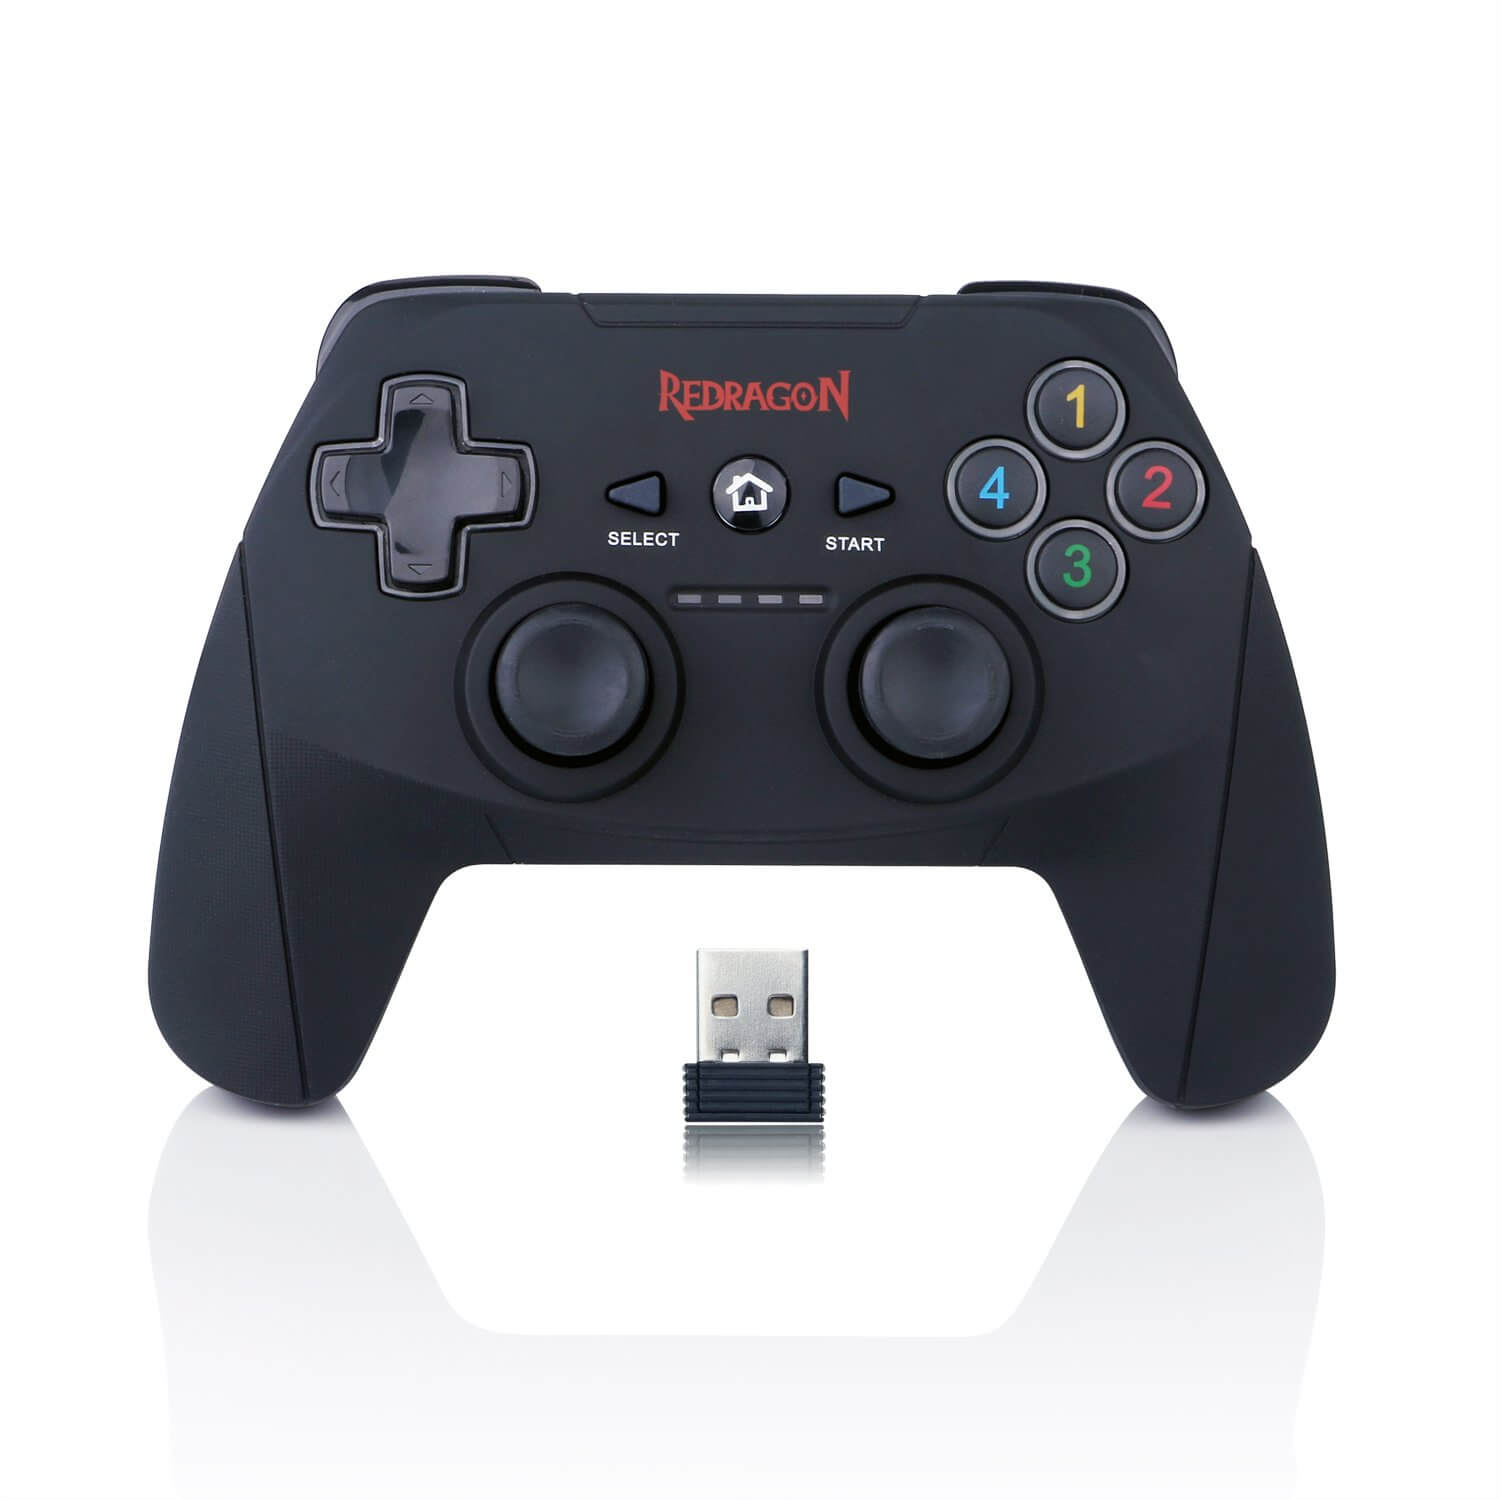 Redragon G808 Harrow Gamepad, PC Game Controller, Joystick with Dual Vibration, for Windows PC, PS3, Playstation, Android, Xbox 360 (Black - Wireless)